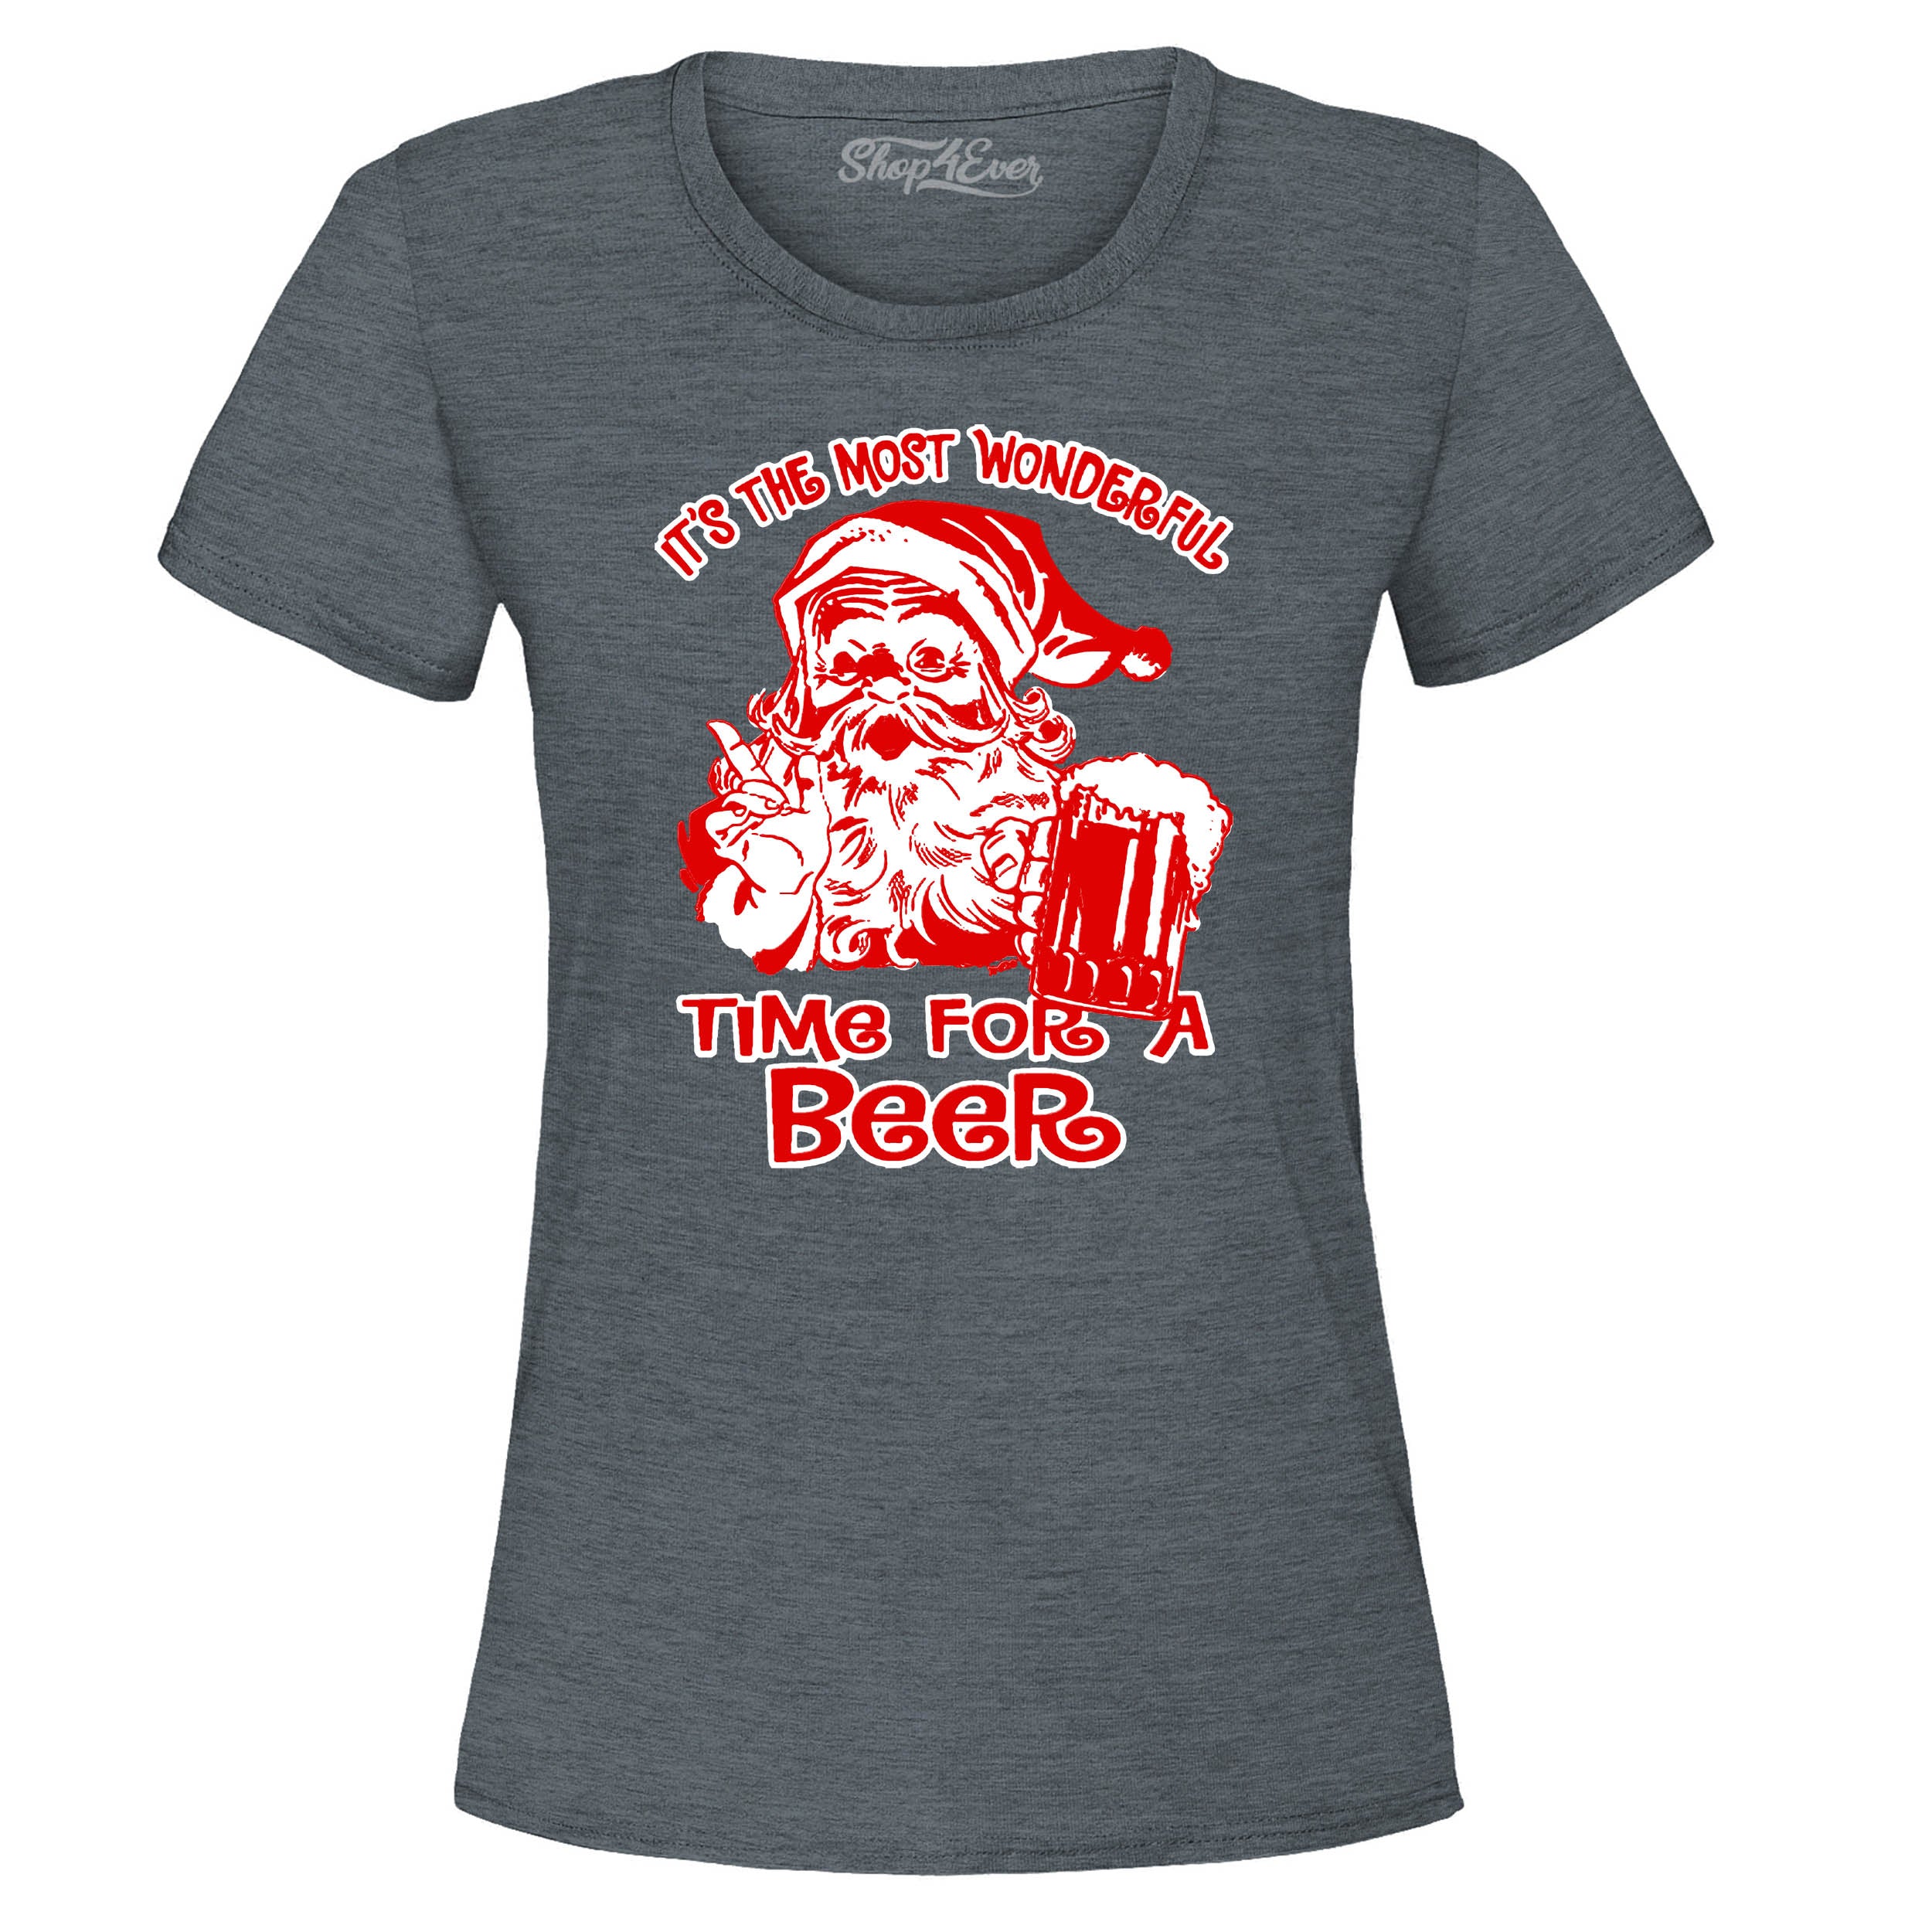 It's The Most Wonderful Time for a Beer Women's T-Shirt